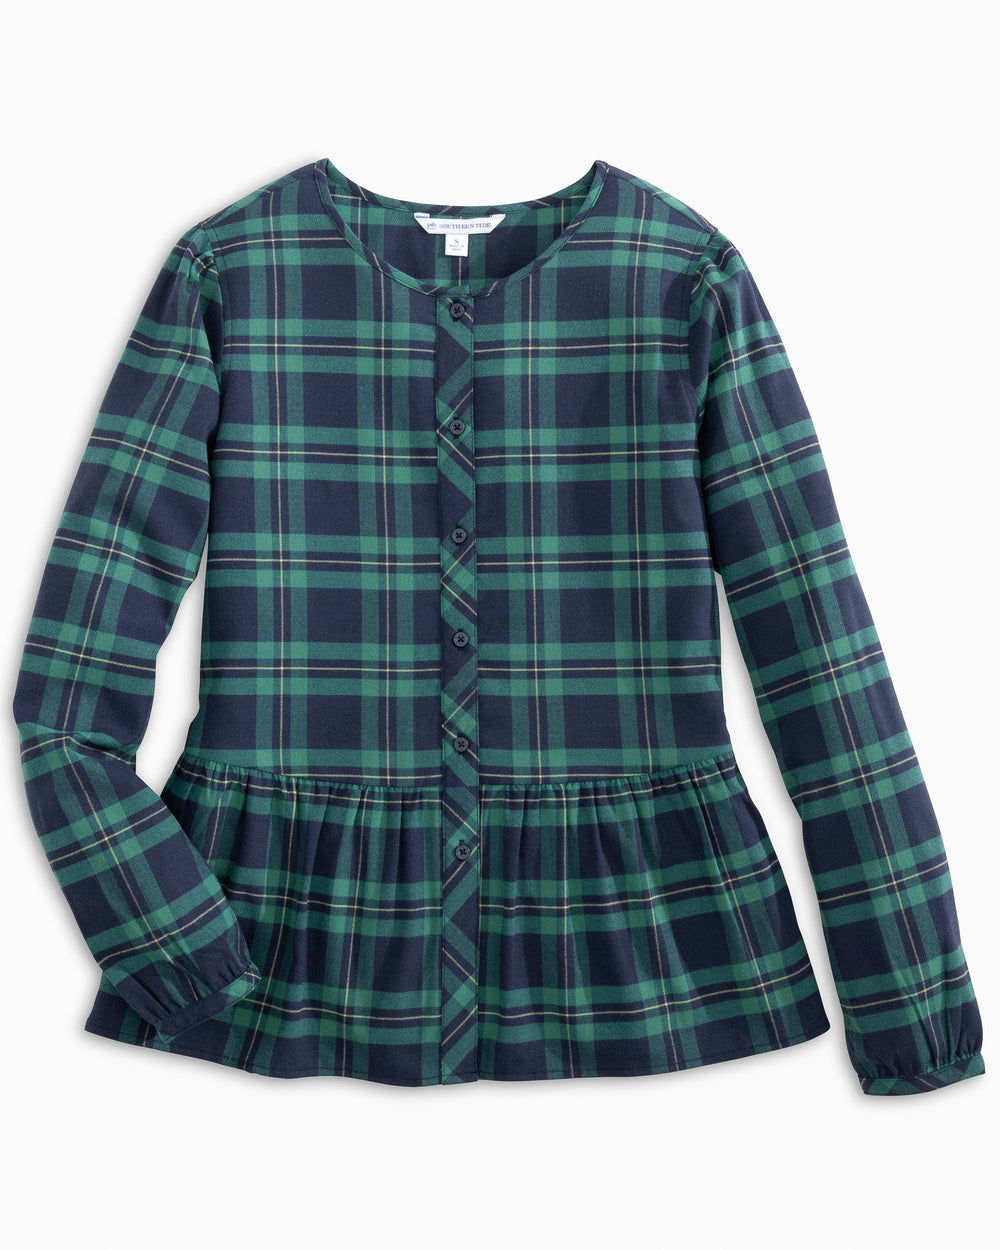 The flat front of the Women's Preston Flannel Intercoastal Top by Southern Tide - Evening Emerald